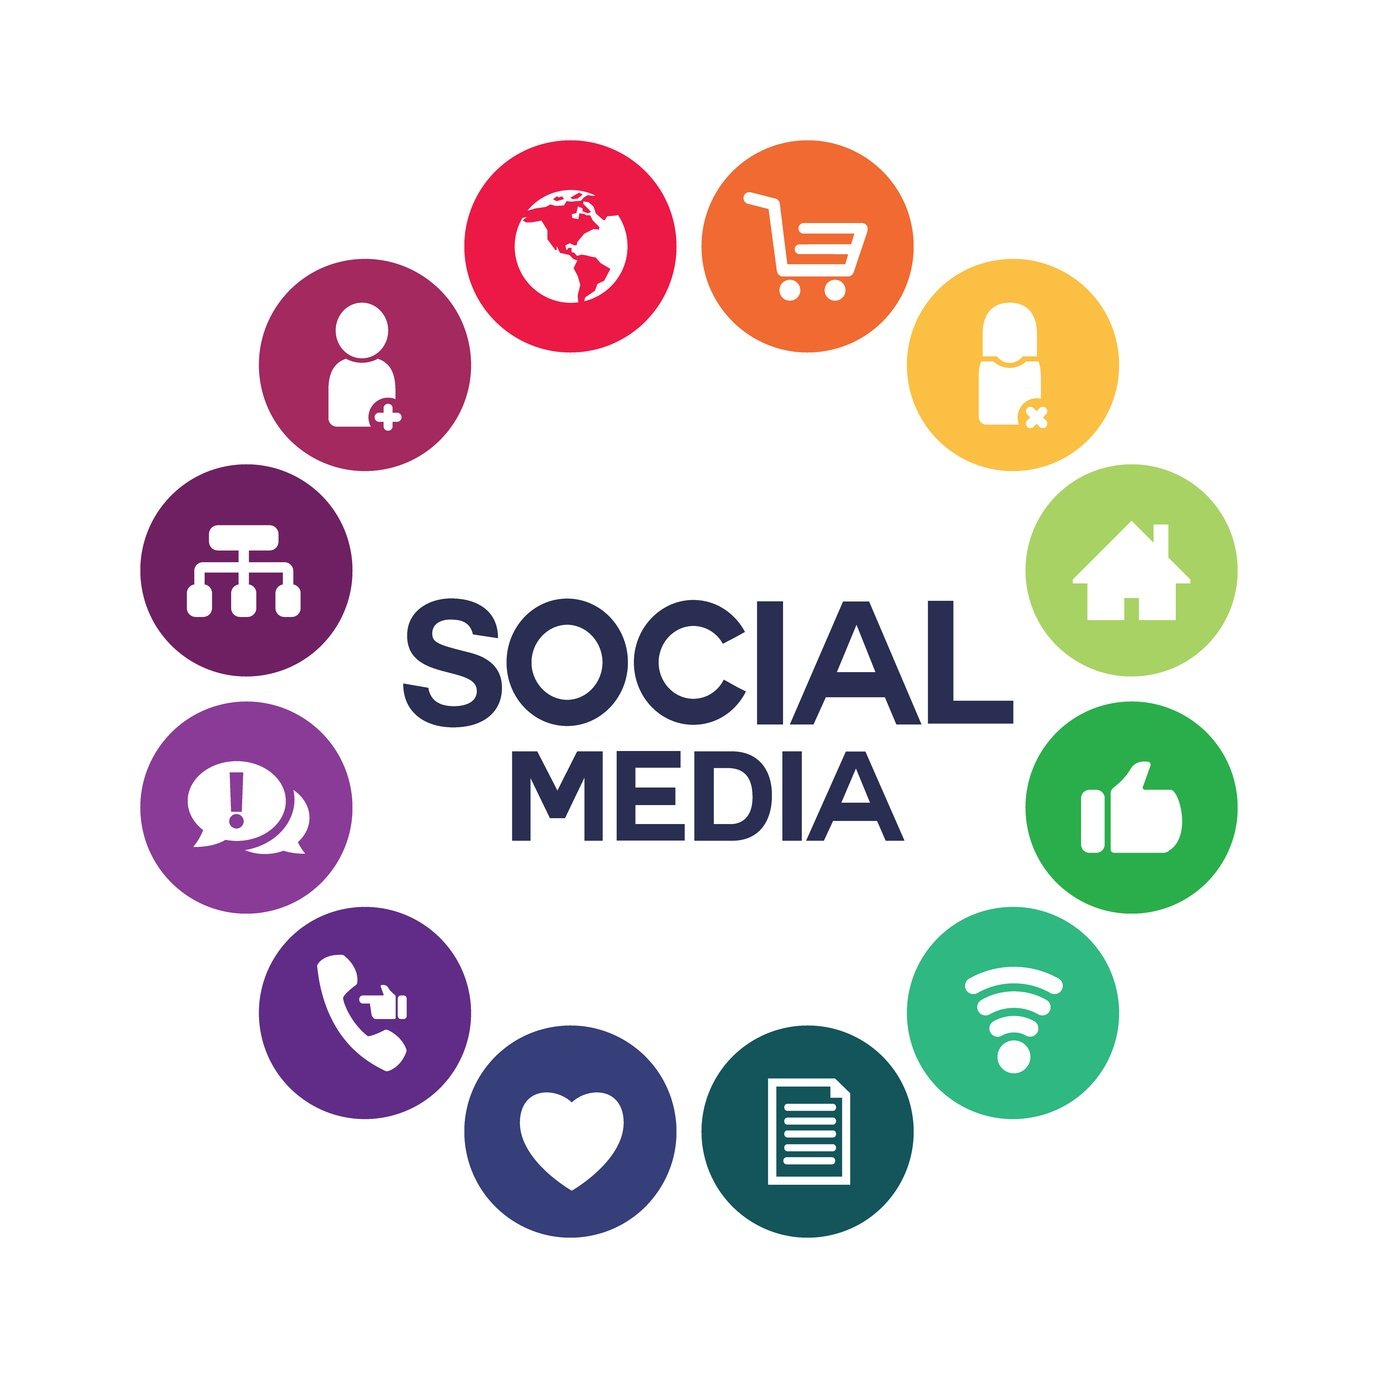 Using Social Media to Drive Traffic, Leads & Sales